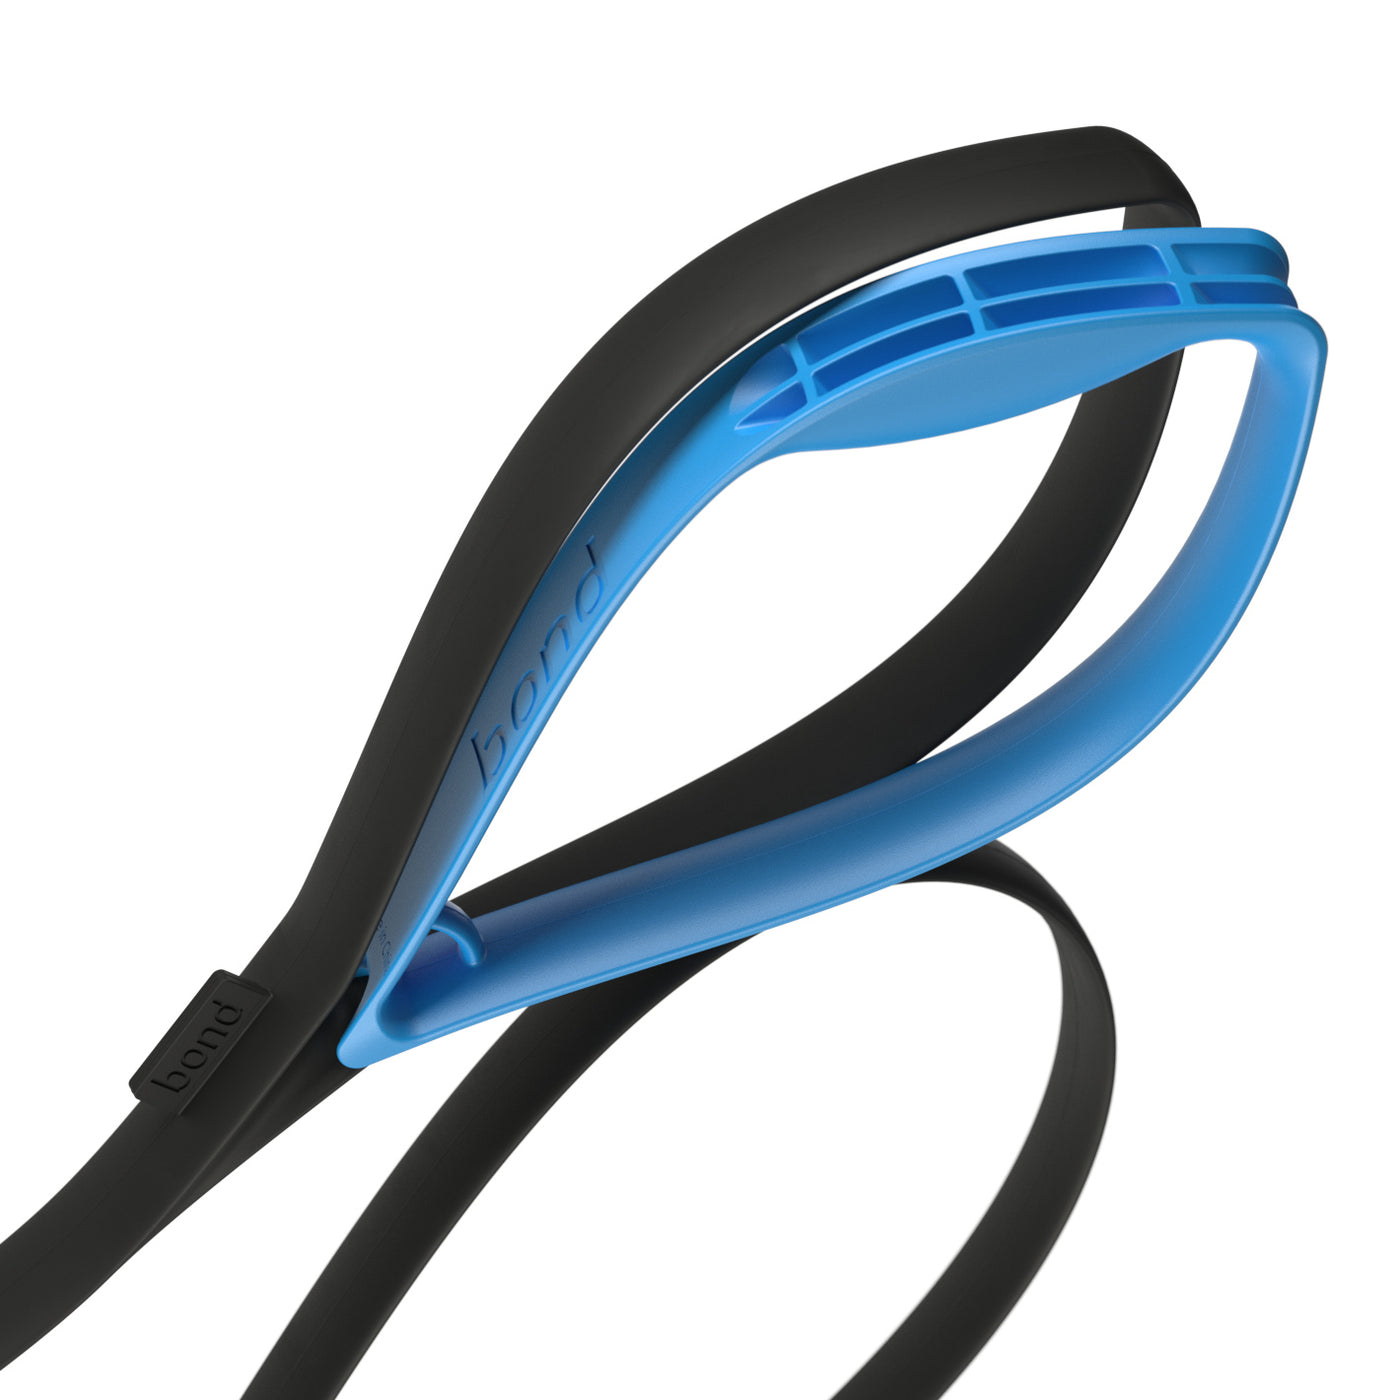 Blue ergonomic grip being attached to dog leash